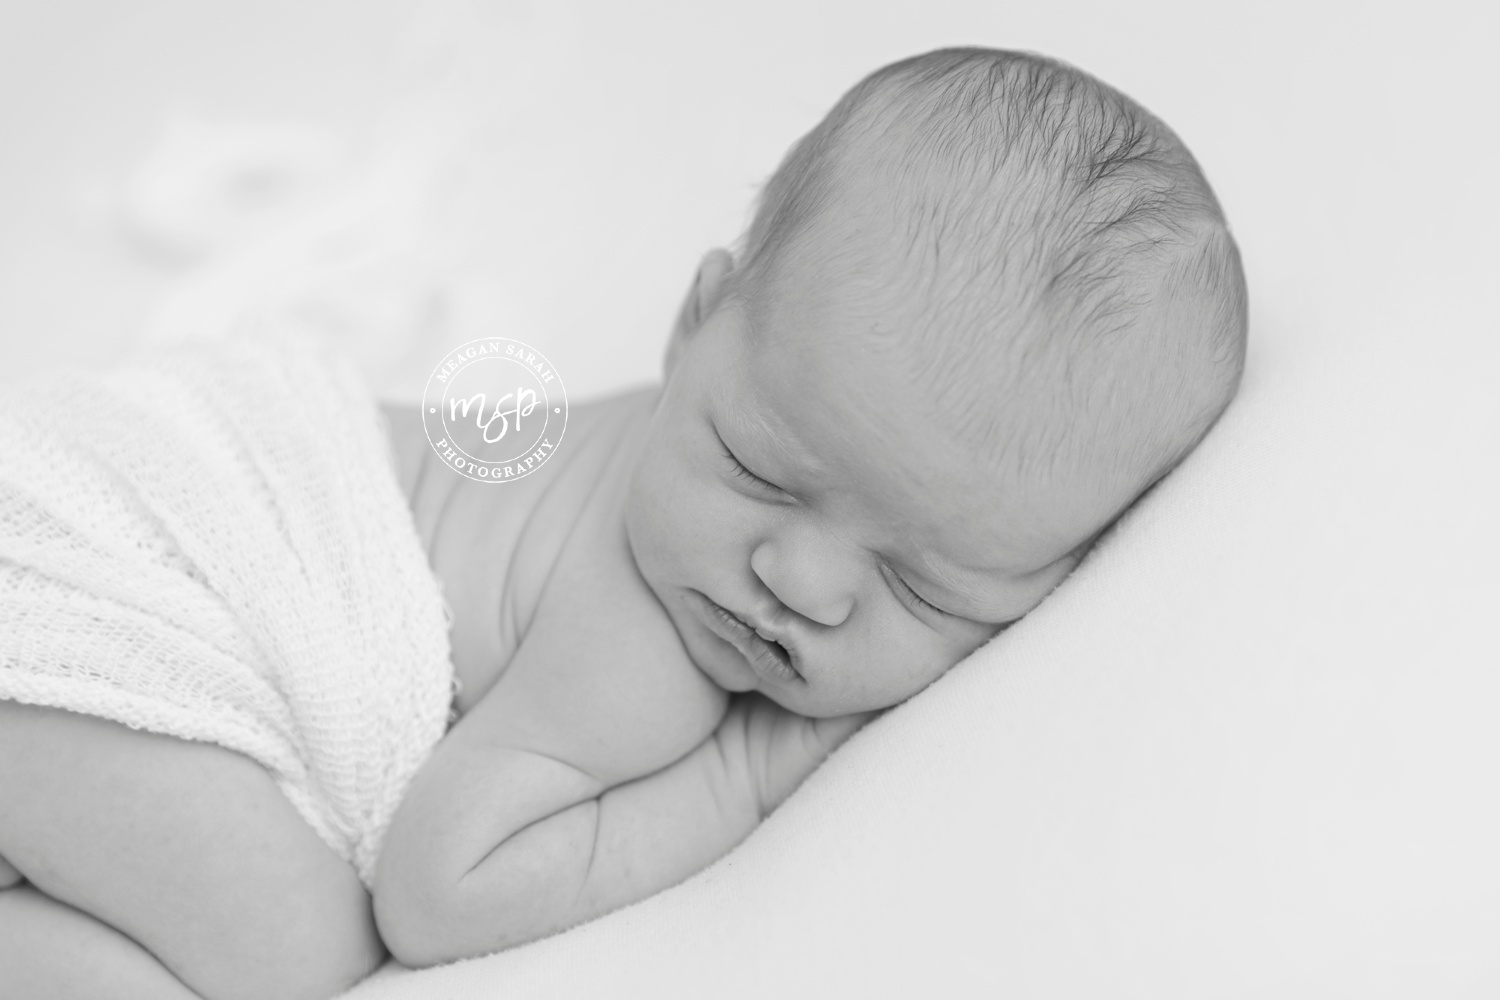 Black and White,PHOTOGRAPHER,Katie Louise Williams,Meagan Sarah Pope,Horsforth Leeds Photographer,Horsforth Photographer,Leeds Photographer,Meagan Sarah Photography,Professional Photographer in Leeds,West Yorkshire Photographer,Sex of Baby,Girl,Horsforth Newborn Photography,Leeds Baby Photographer,Leeds Newborn Photographer,Newborn Babies,Newborn Photographer,Newborn Photography,Photos of Babies,Photos of Newborns,Yorkshire Newborn Photographer,Yorkshire Newborn Photography,Bum Up Pose,